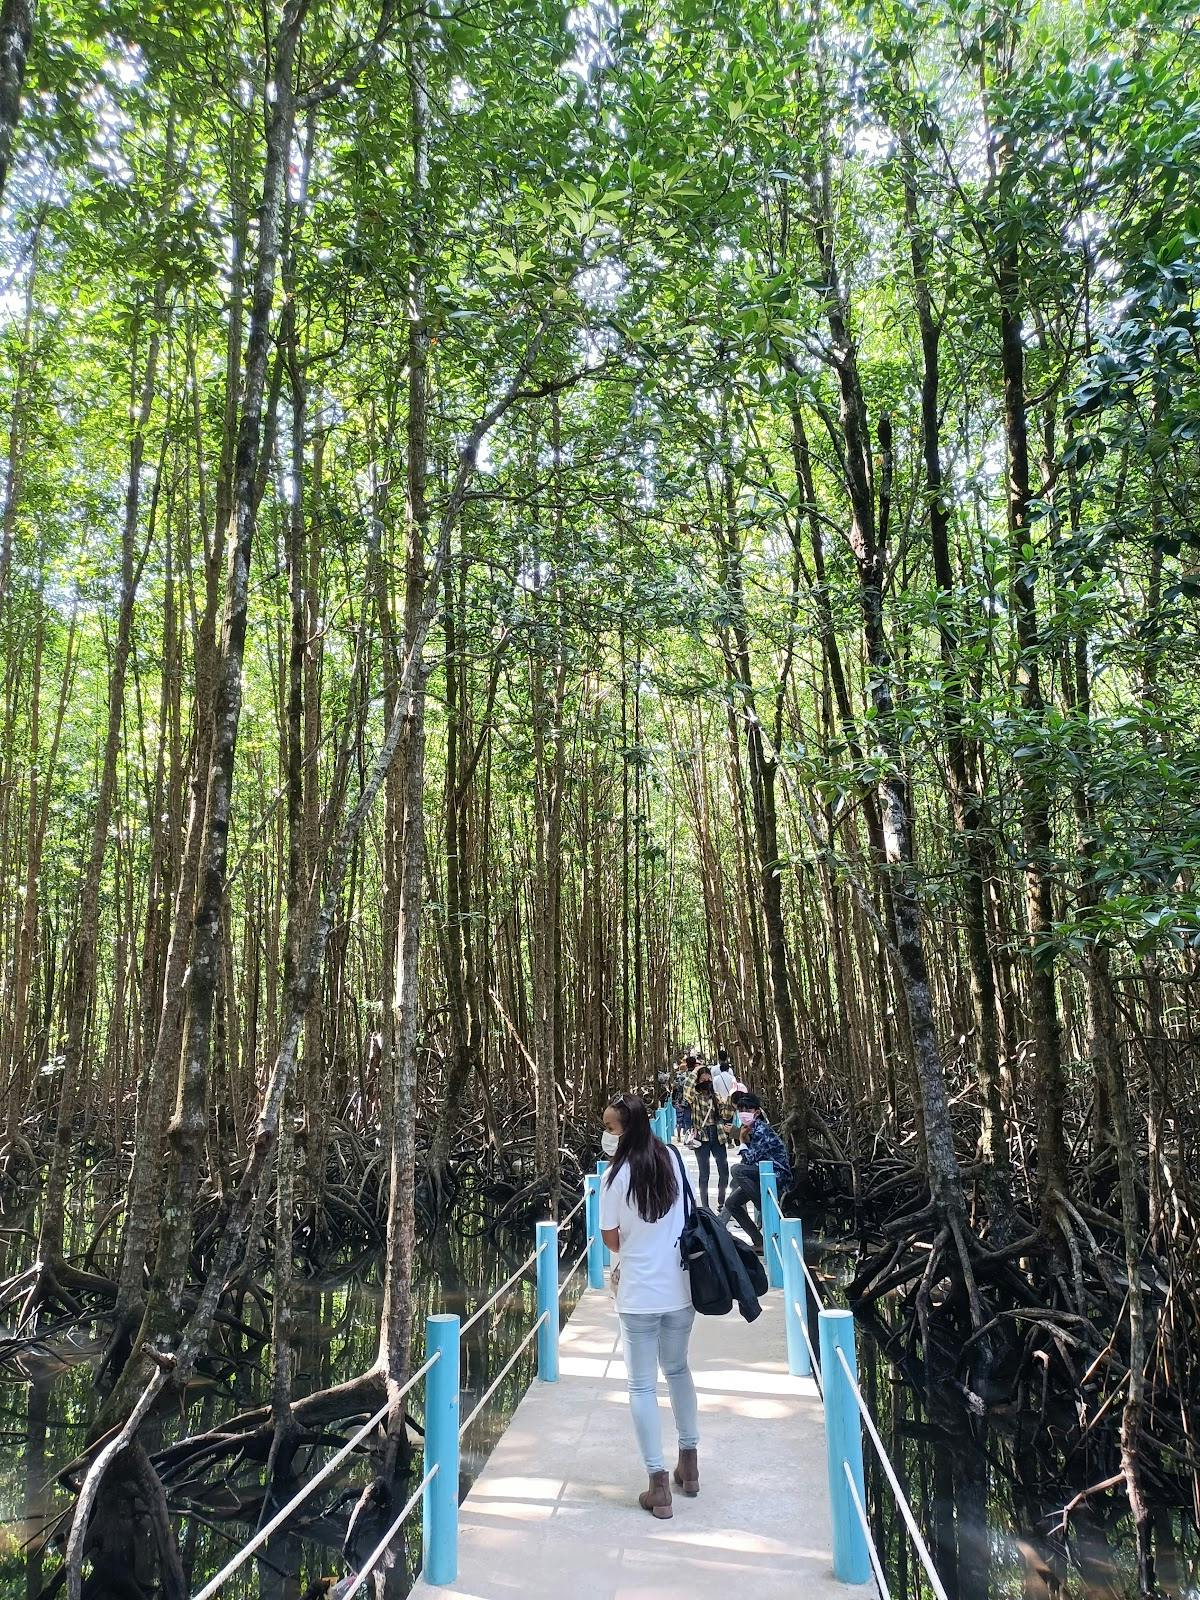 Image - Mangrove Forest